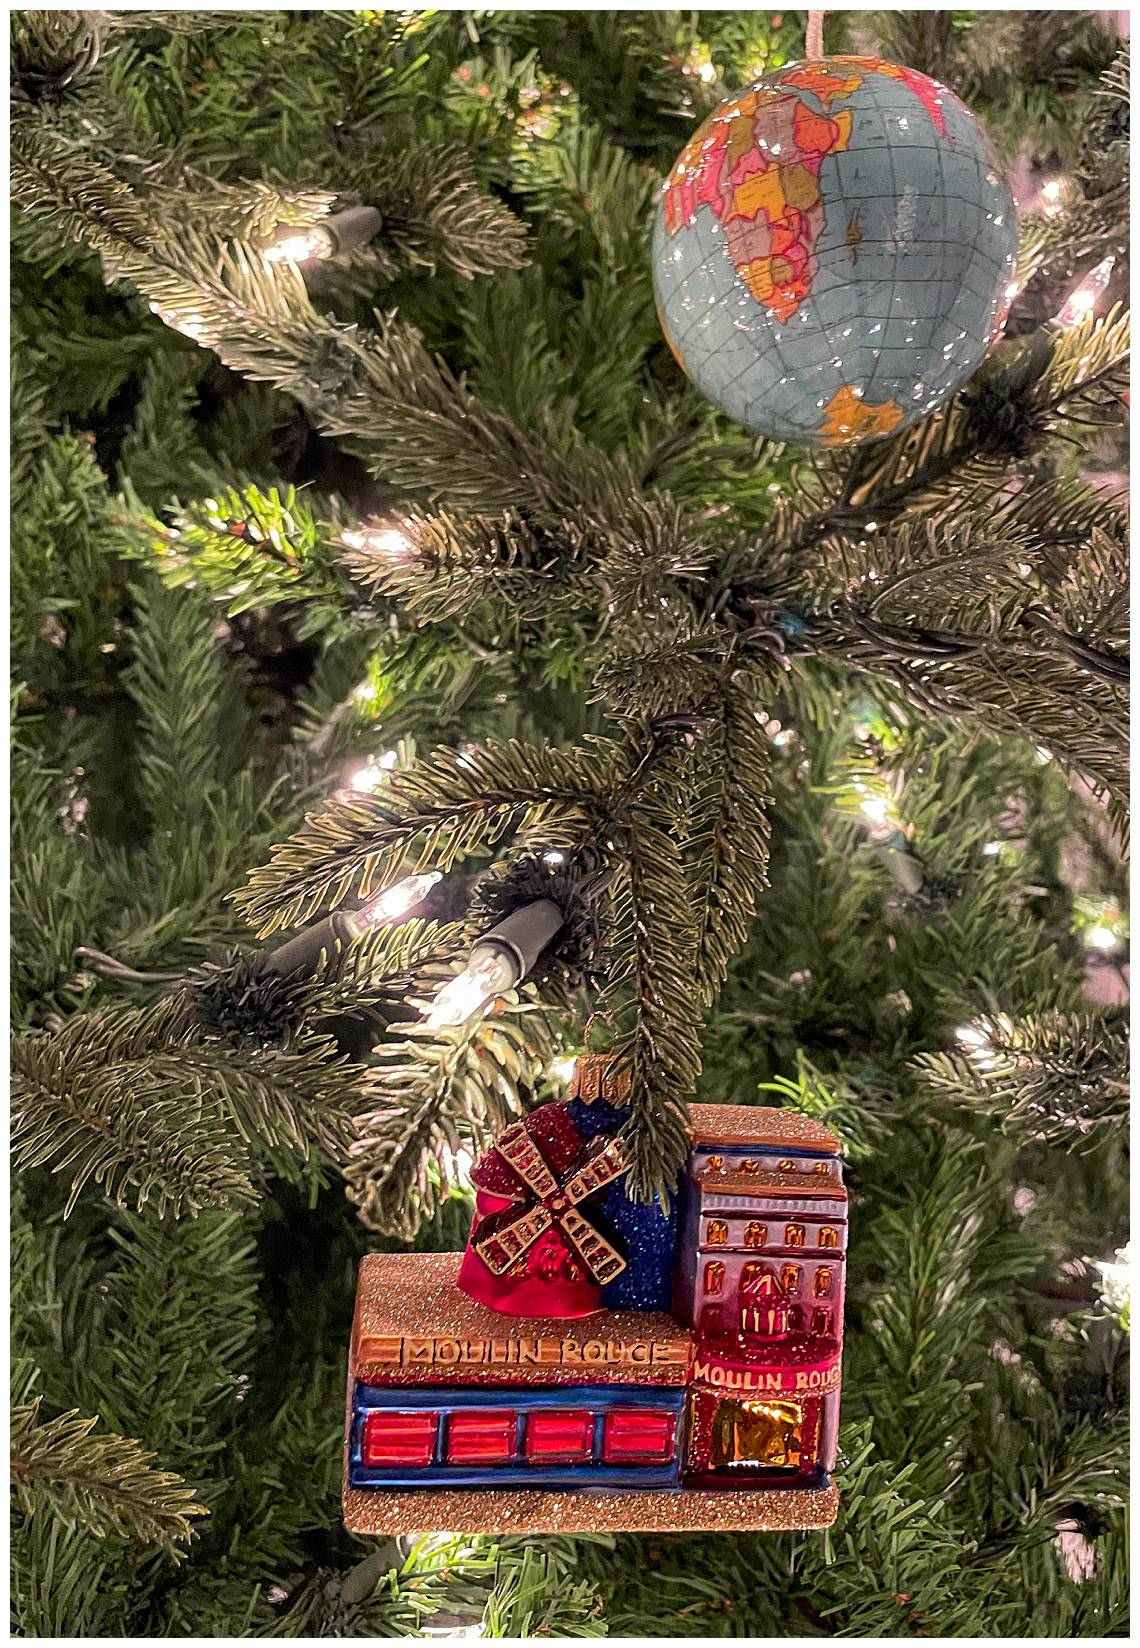 journey of doing - Thinking about creating a travel Christmas tree to remember your travels?  Click here for ideas on where to find travel Christmas ornaments when you're home!